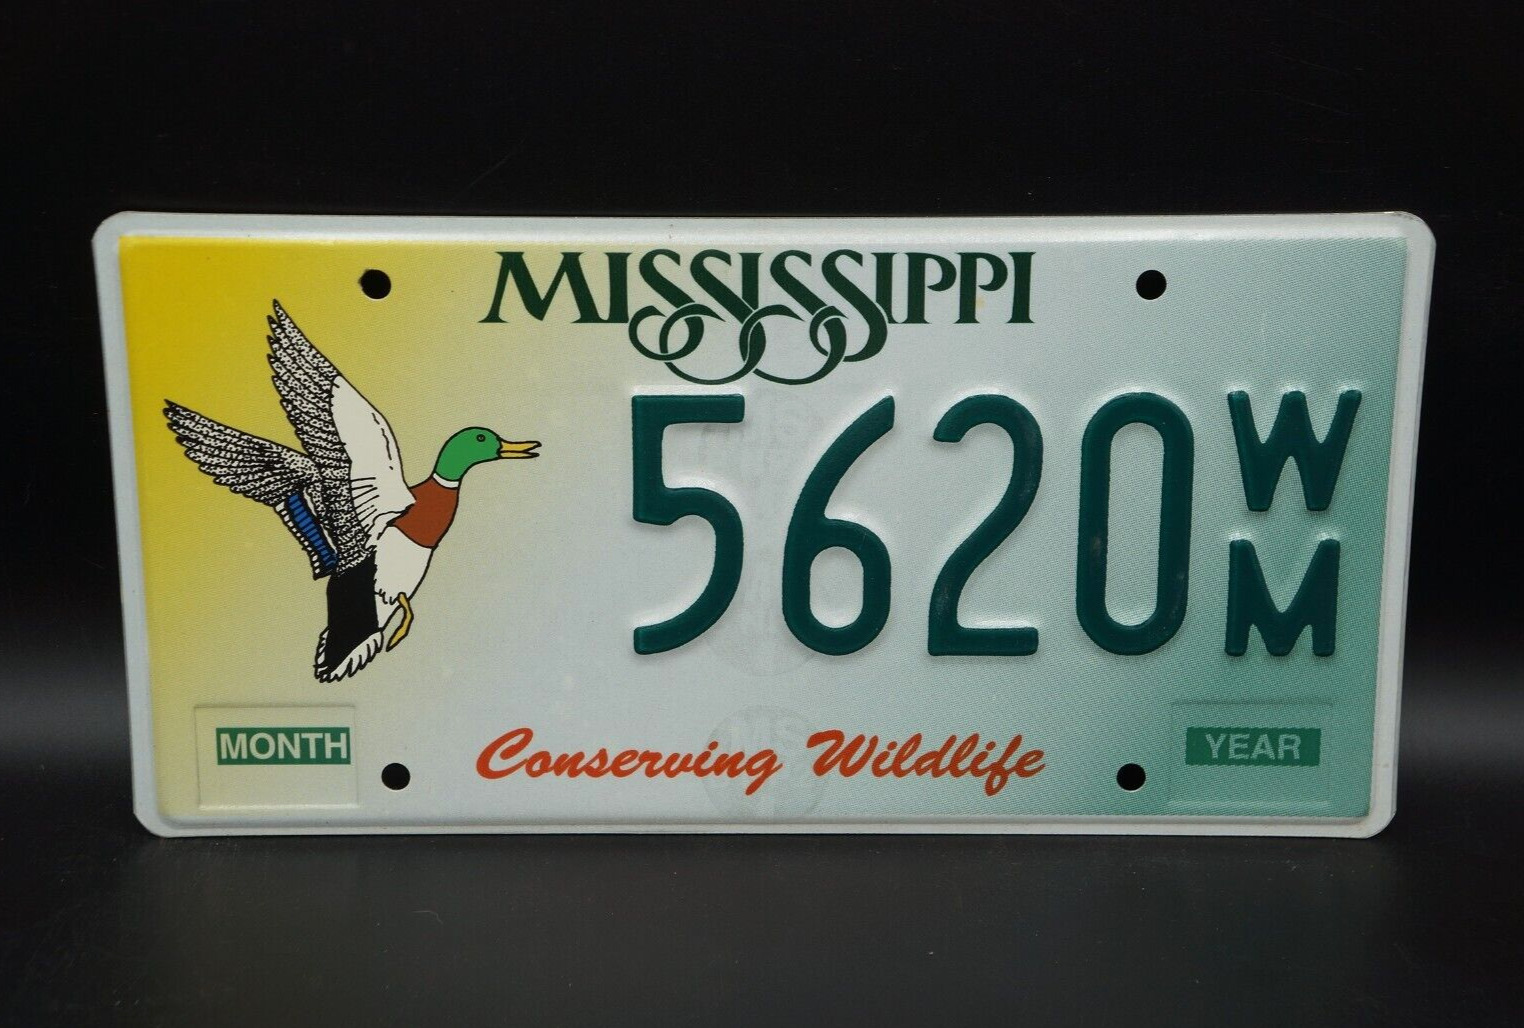 Mississippi DUCK License Plate - Conserving Wildlife